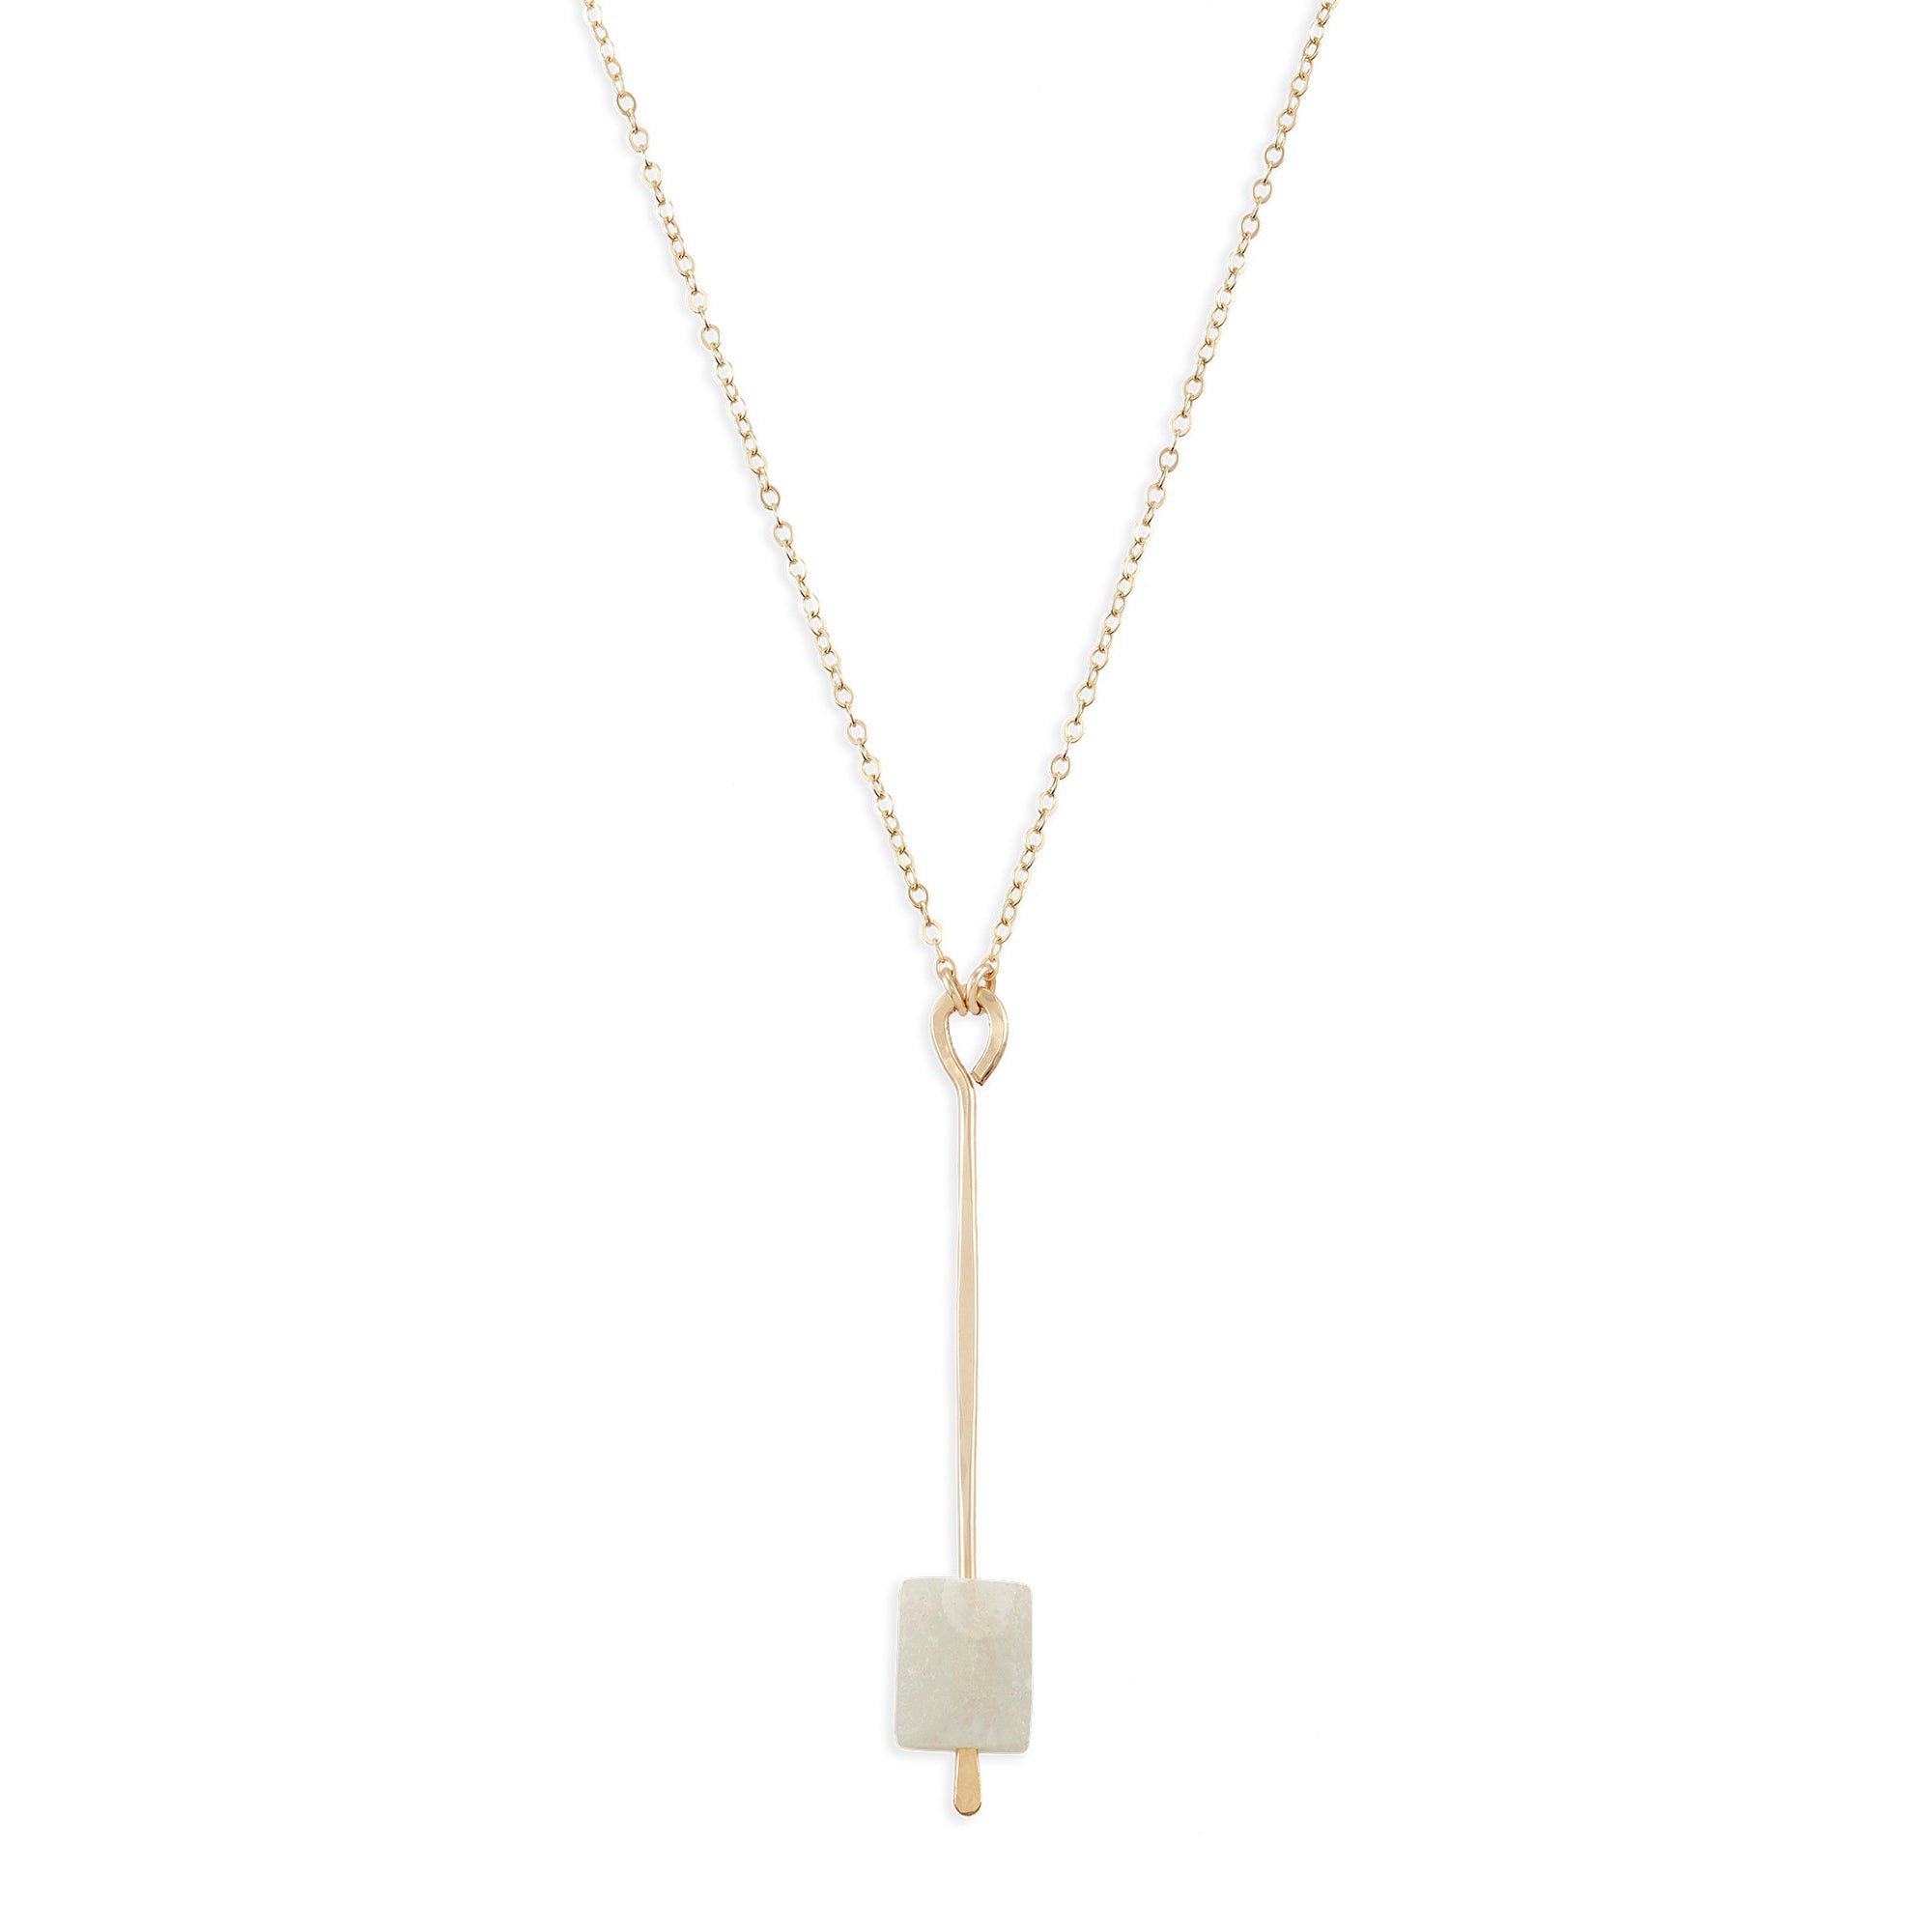 The Pendulum Necklace features frosted onyx suspended from a forged pendant in either sterling silver or 14k gold fill.